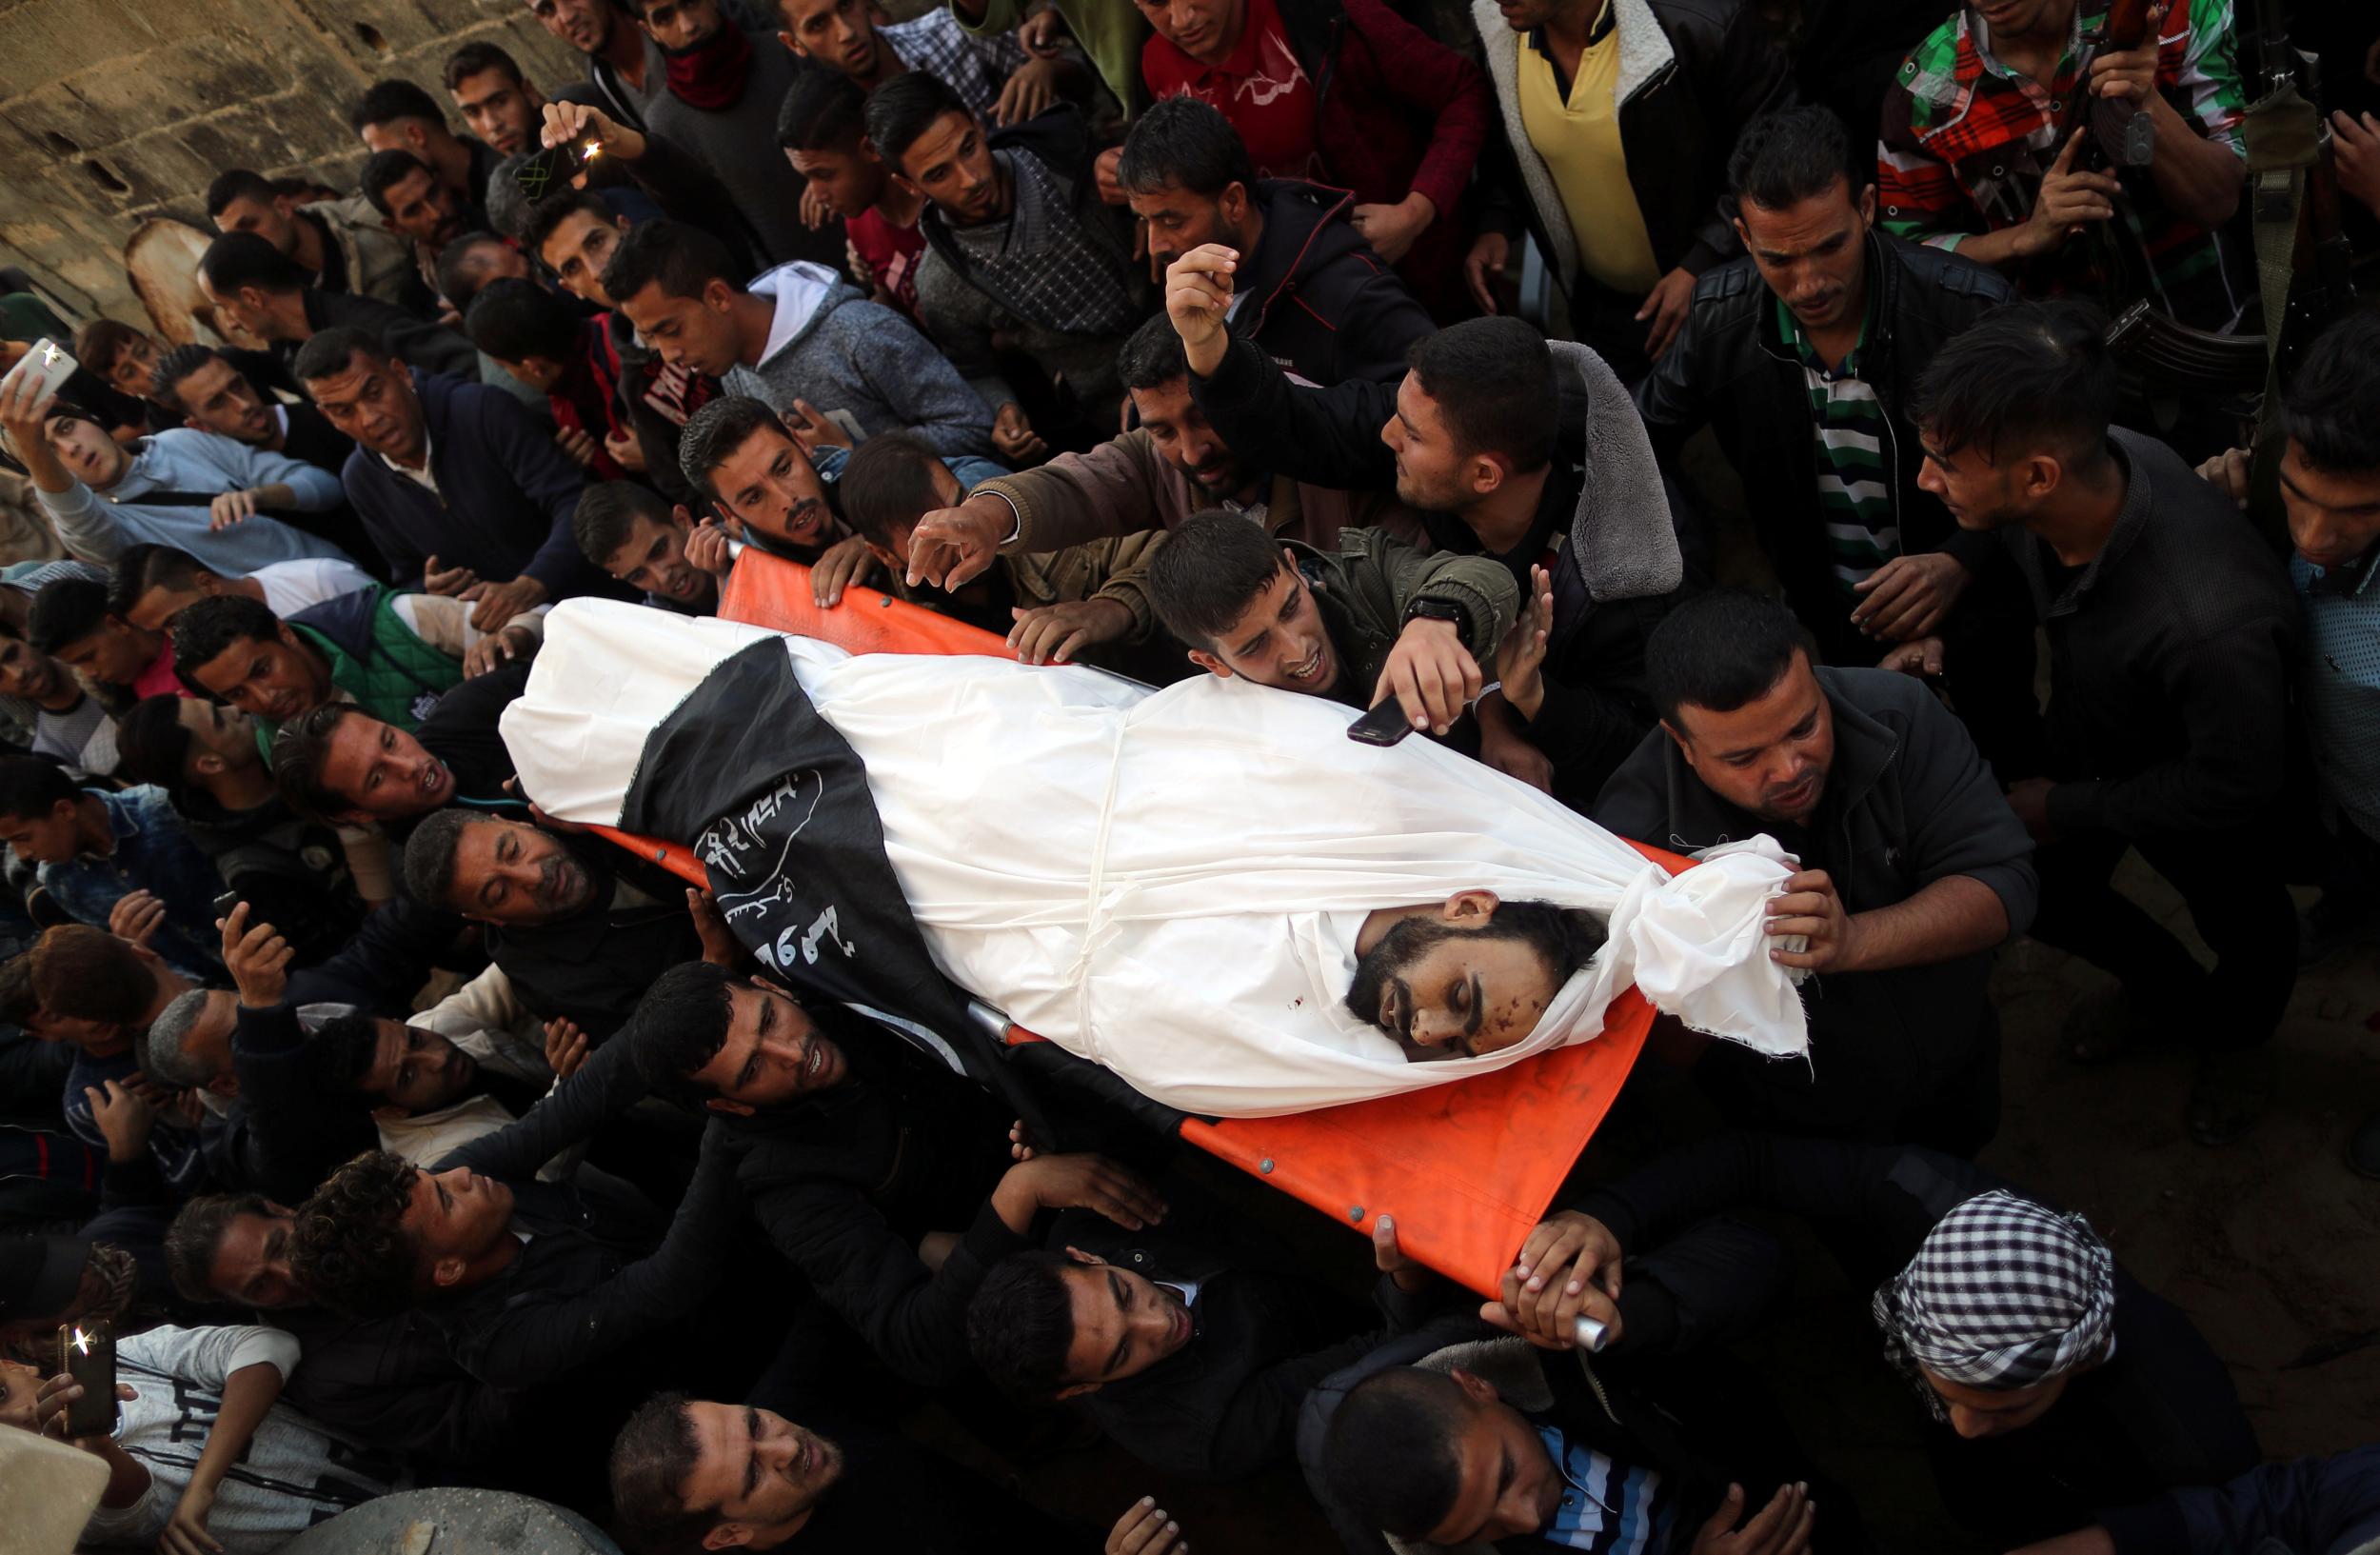 Mourners carry the body of Palestinian Khaled Qwaider, who was killed in an Israeli air strike, during his funeral, in Khan Younis in the southern Gaza Strip